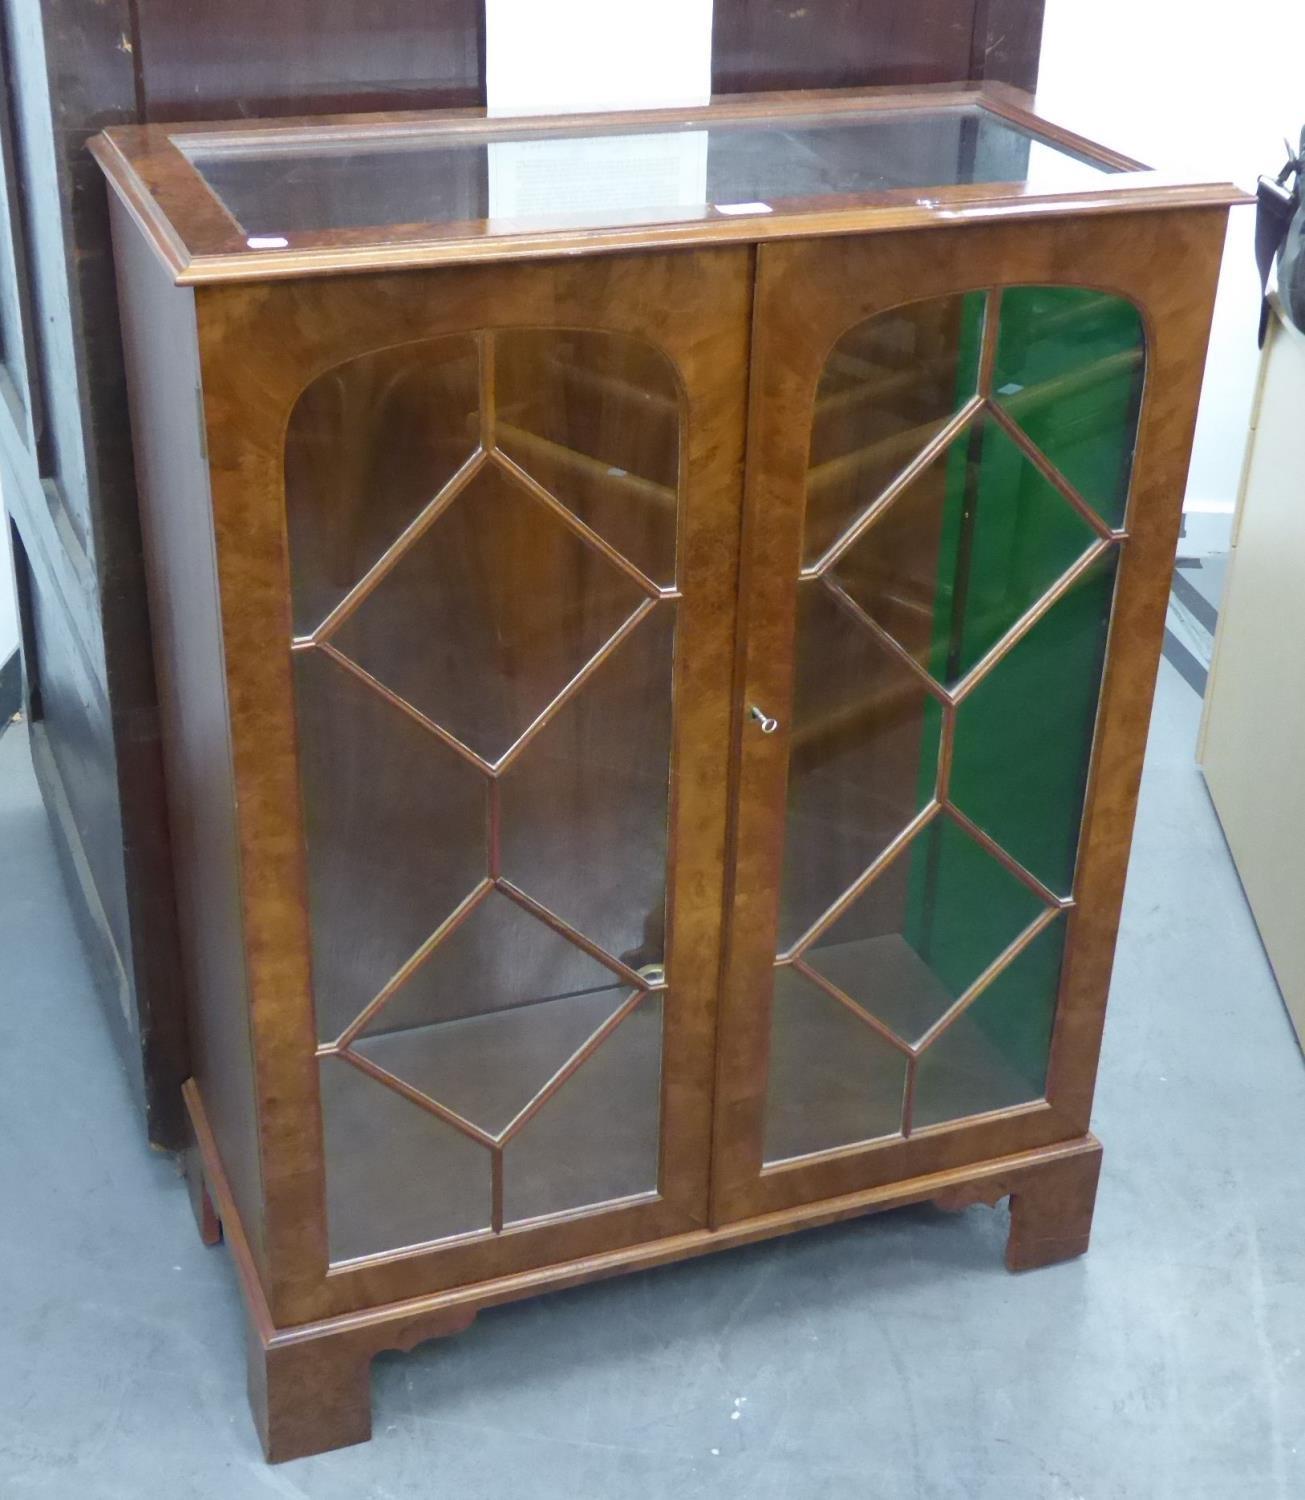 A 1930's WALNUTWOOD DISPLAY CABINET WITH TWO GLASS SHELVES